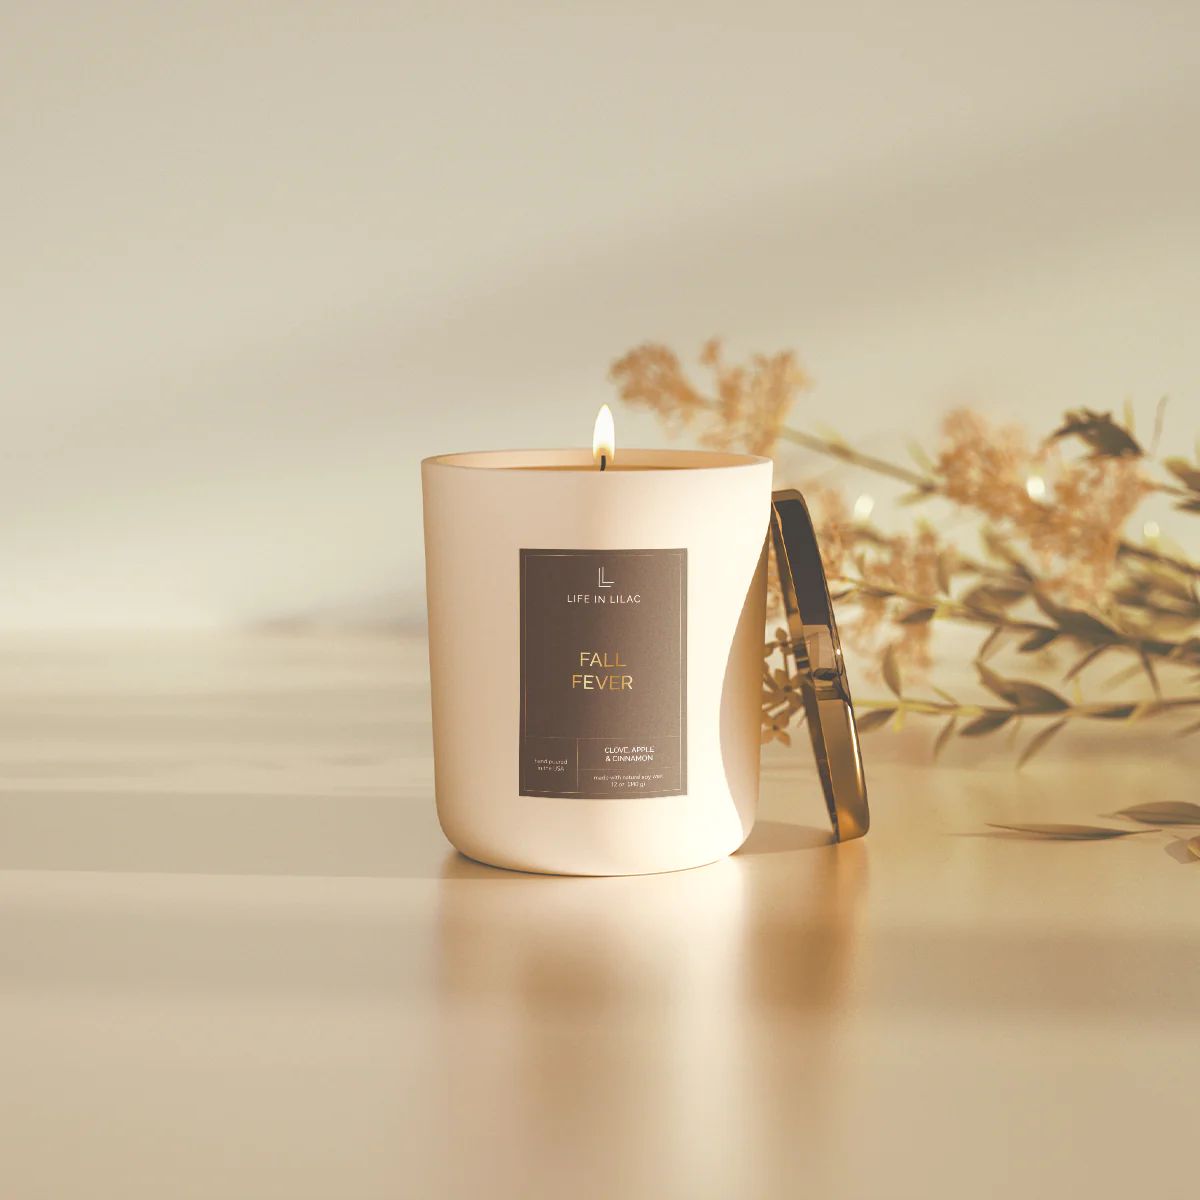 Fall Fever Candle | Life In Lilac